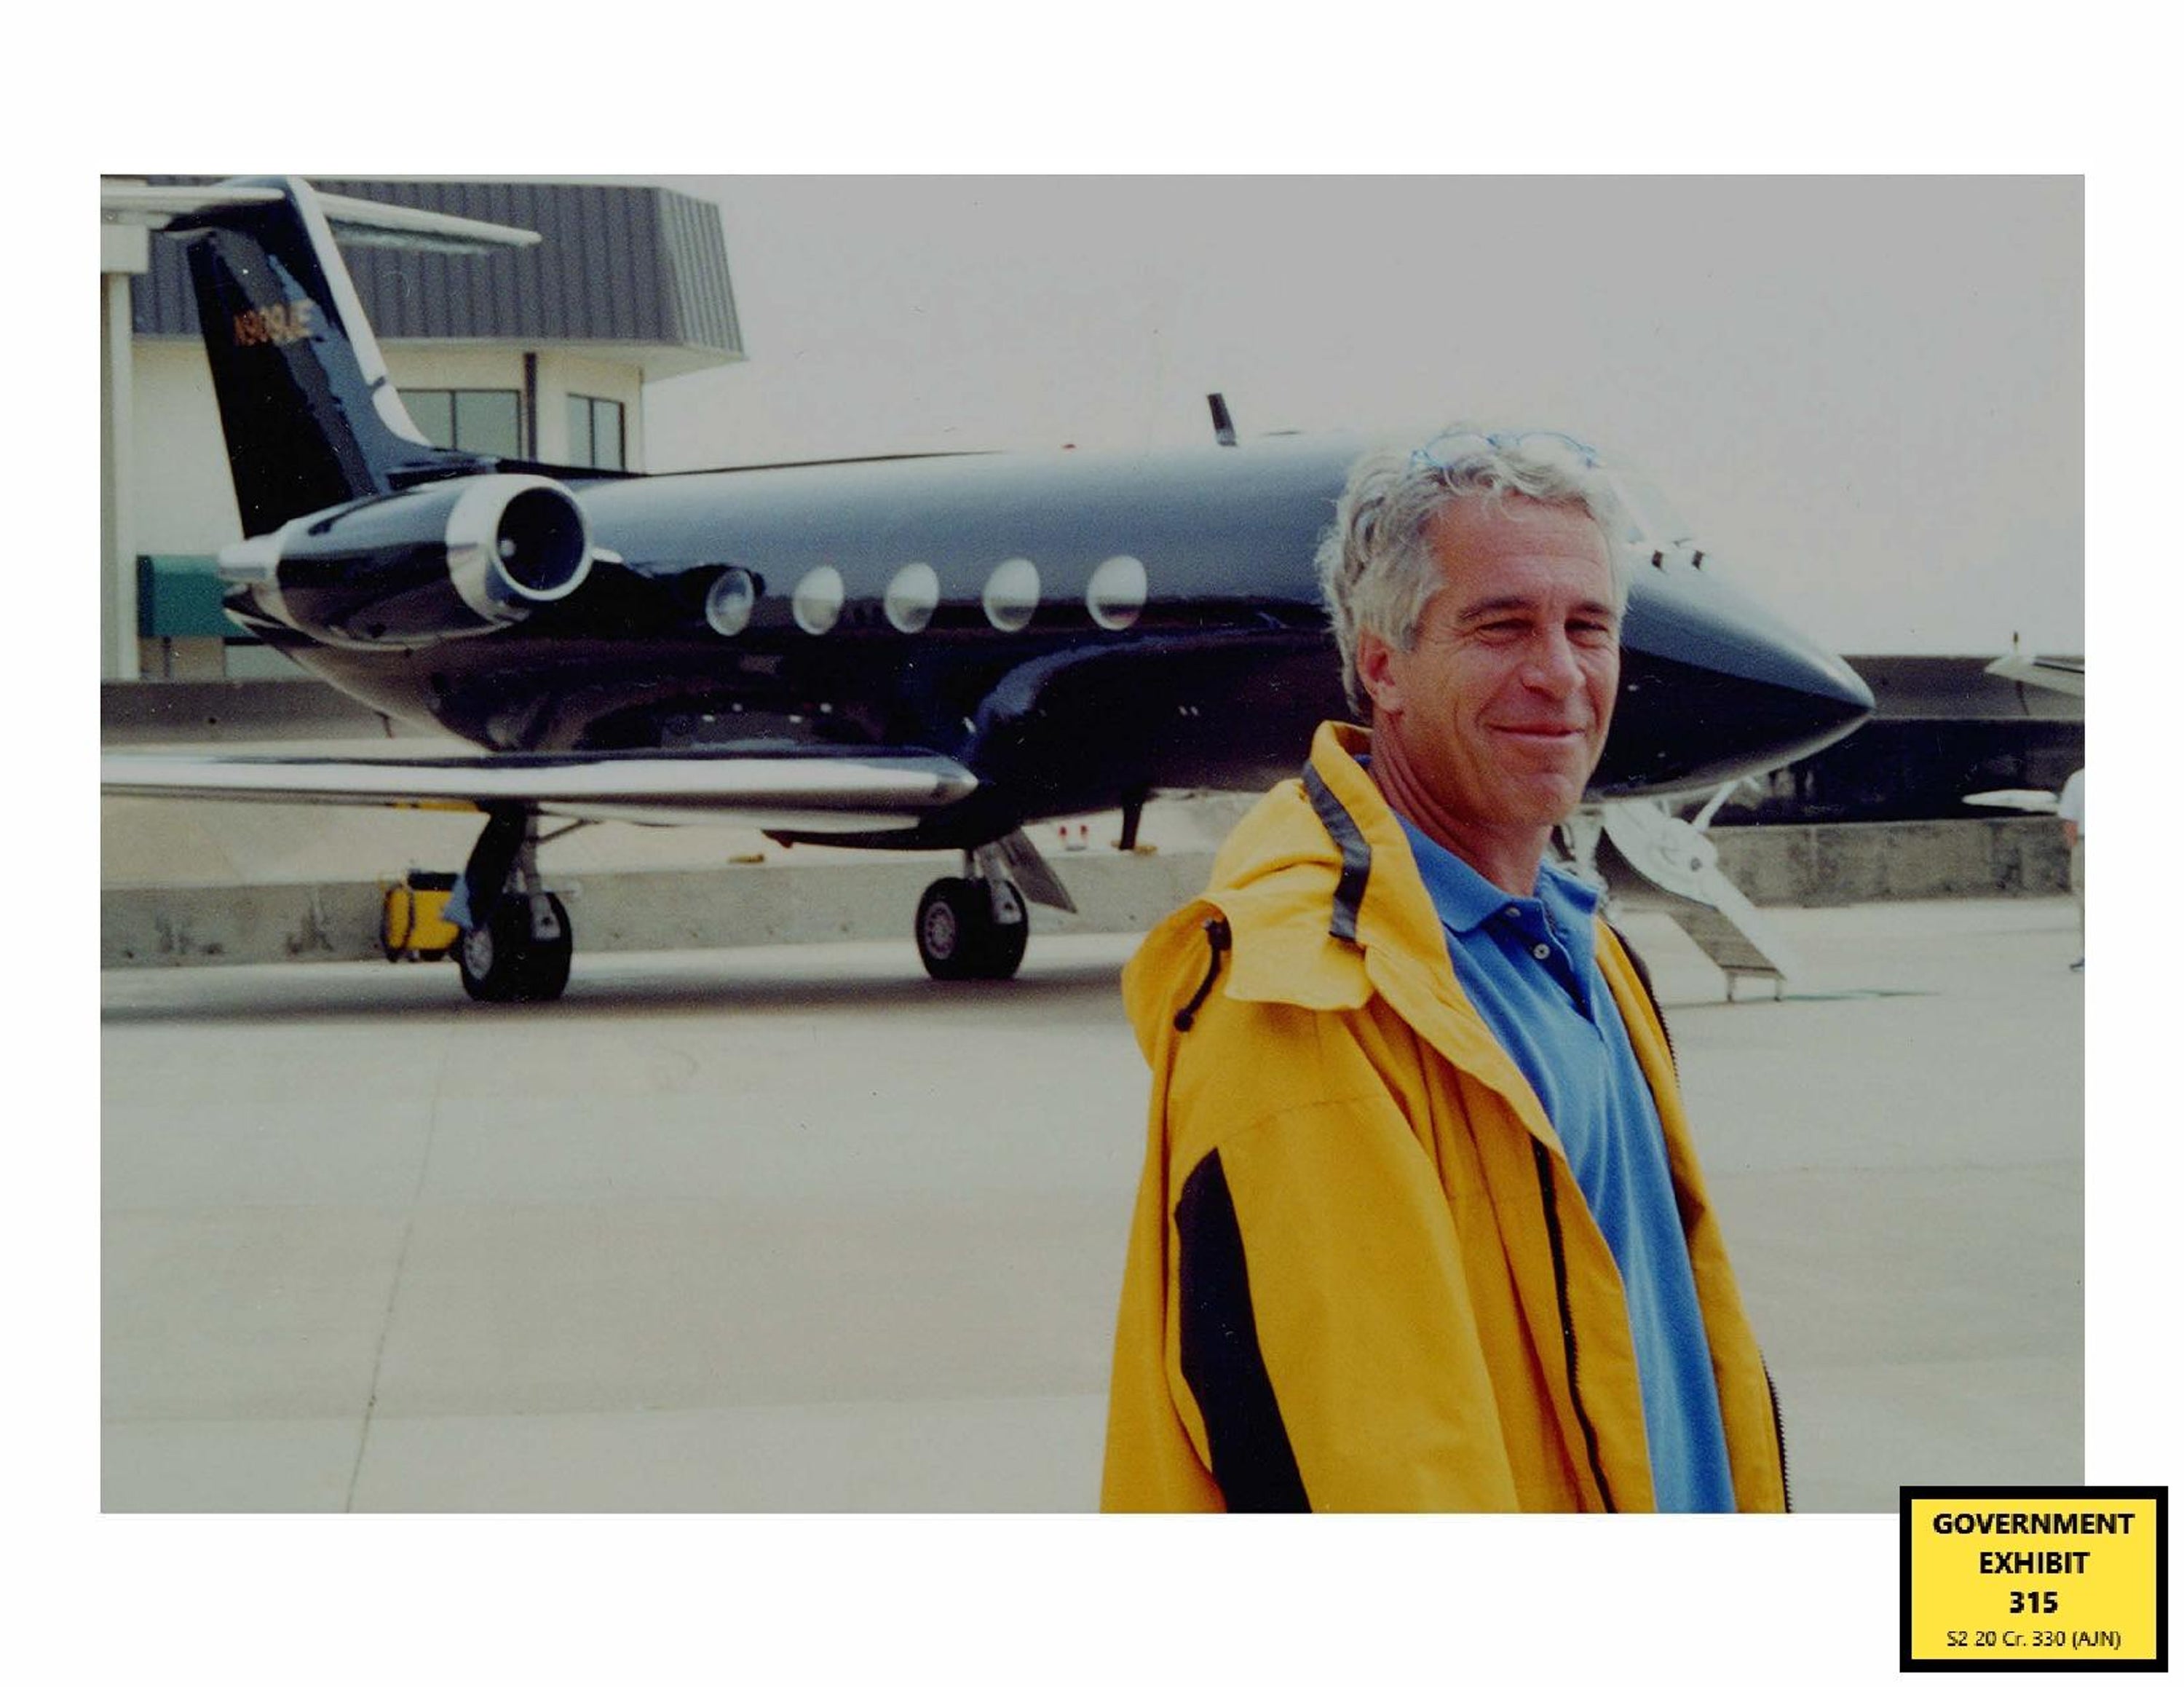 Epstein pictured in front of his second private plane, a Gulfstream